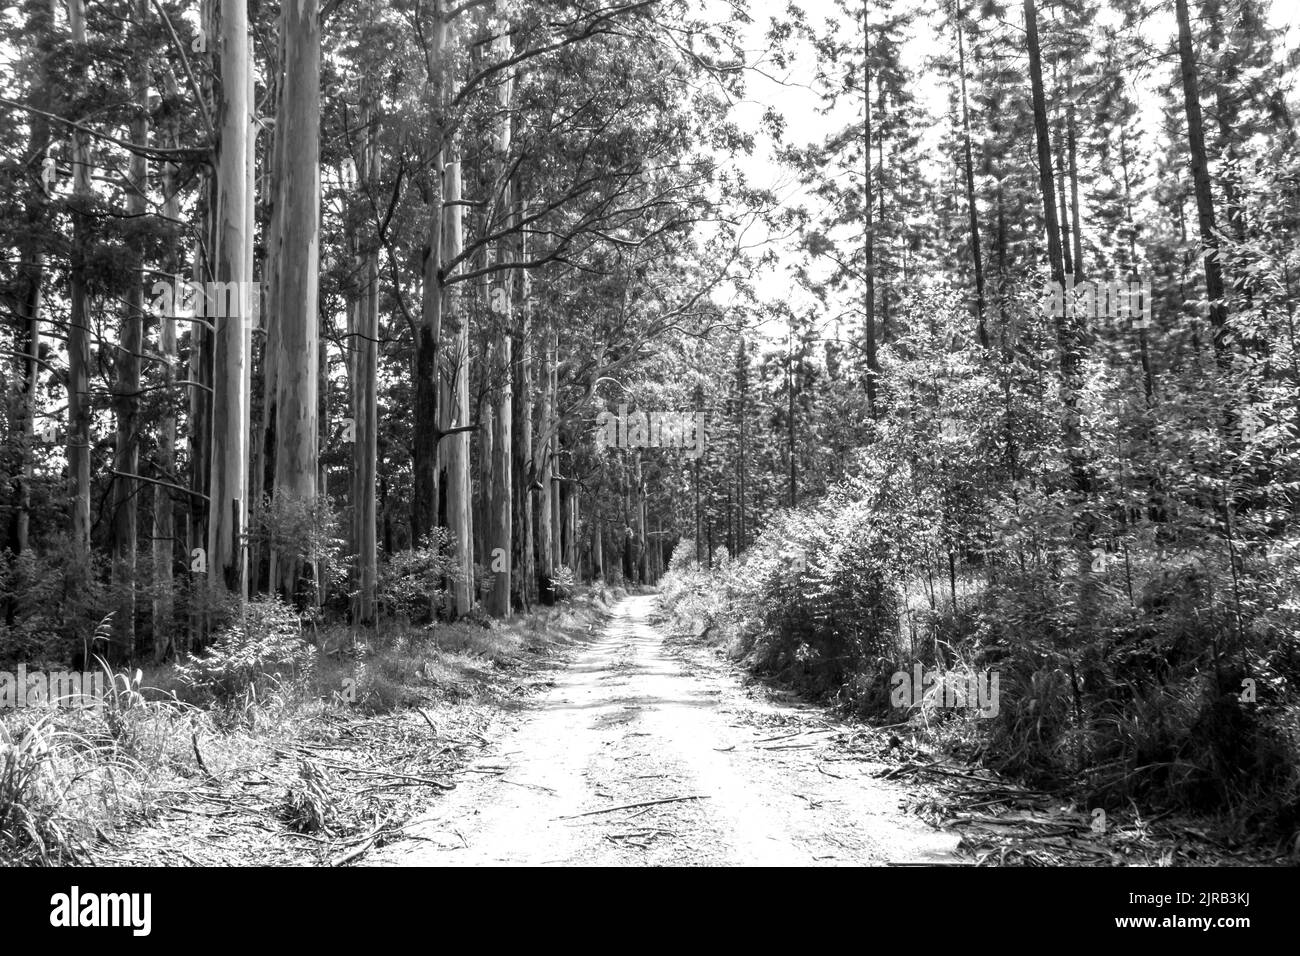 Road going through the Plantations of Magoebaskloof, South Africa, in Black and white. Stock Photo